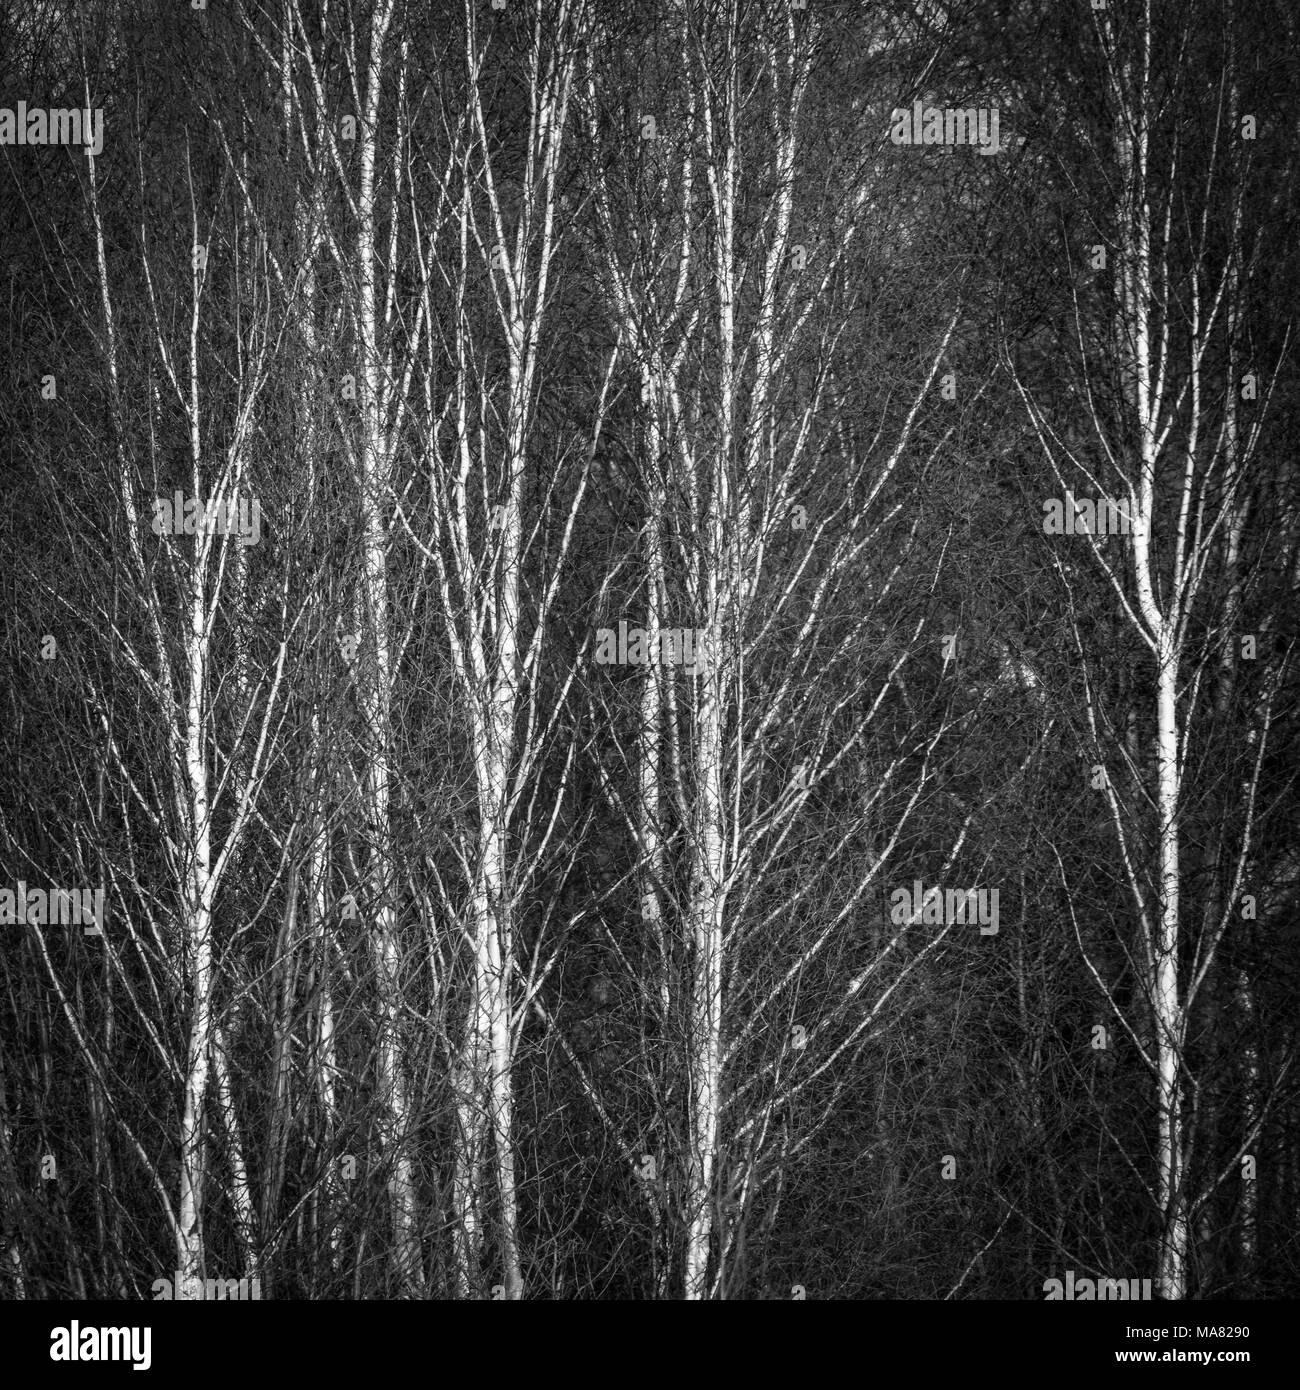 Abstract Black And White Nature Background Birch Tree